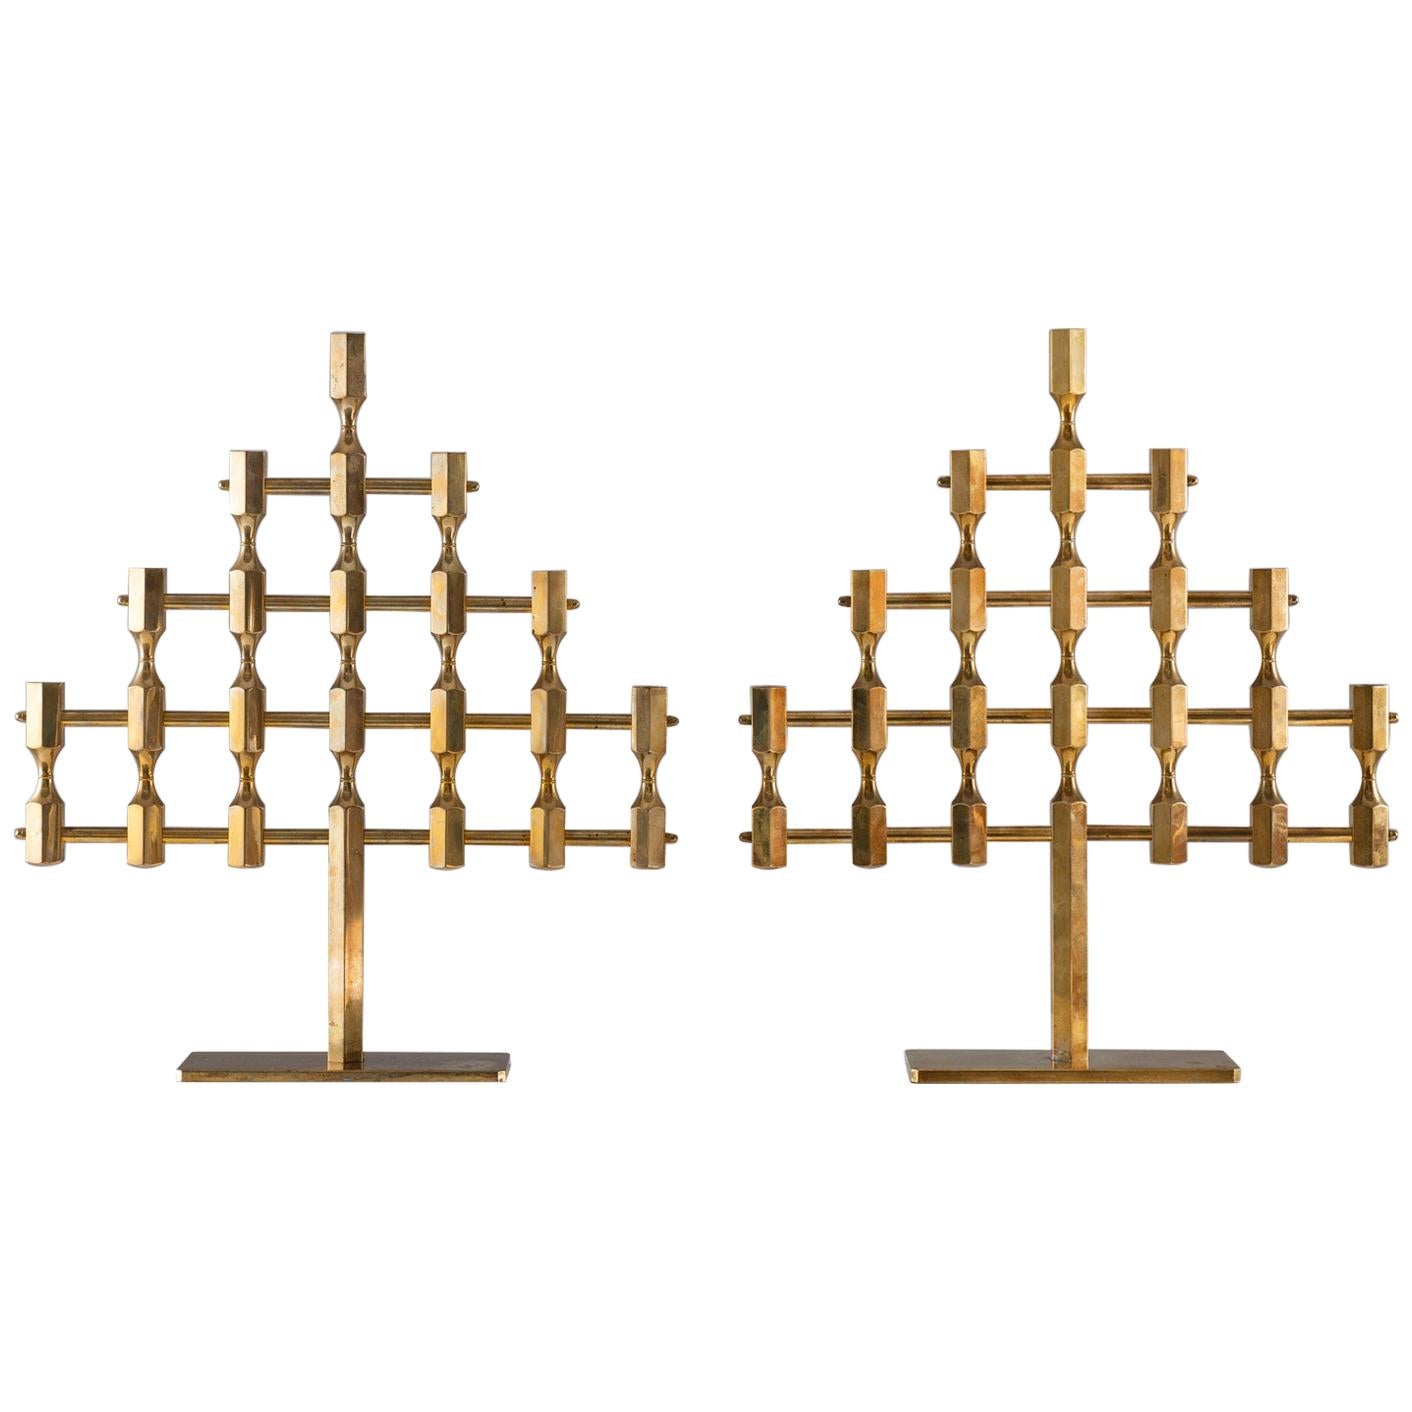 Pair of Large Swedish Candelabras in Brass by Lars Bergsten for Gusum